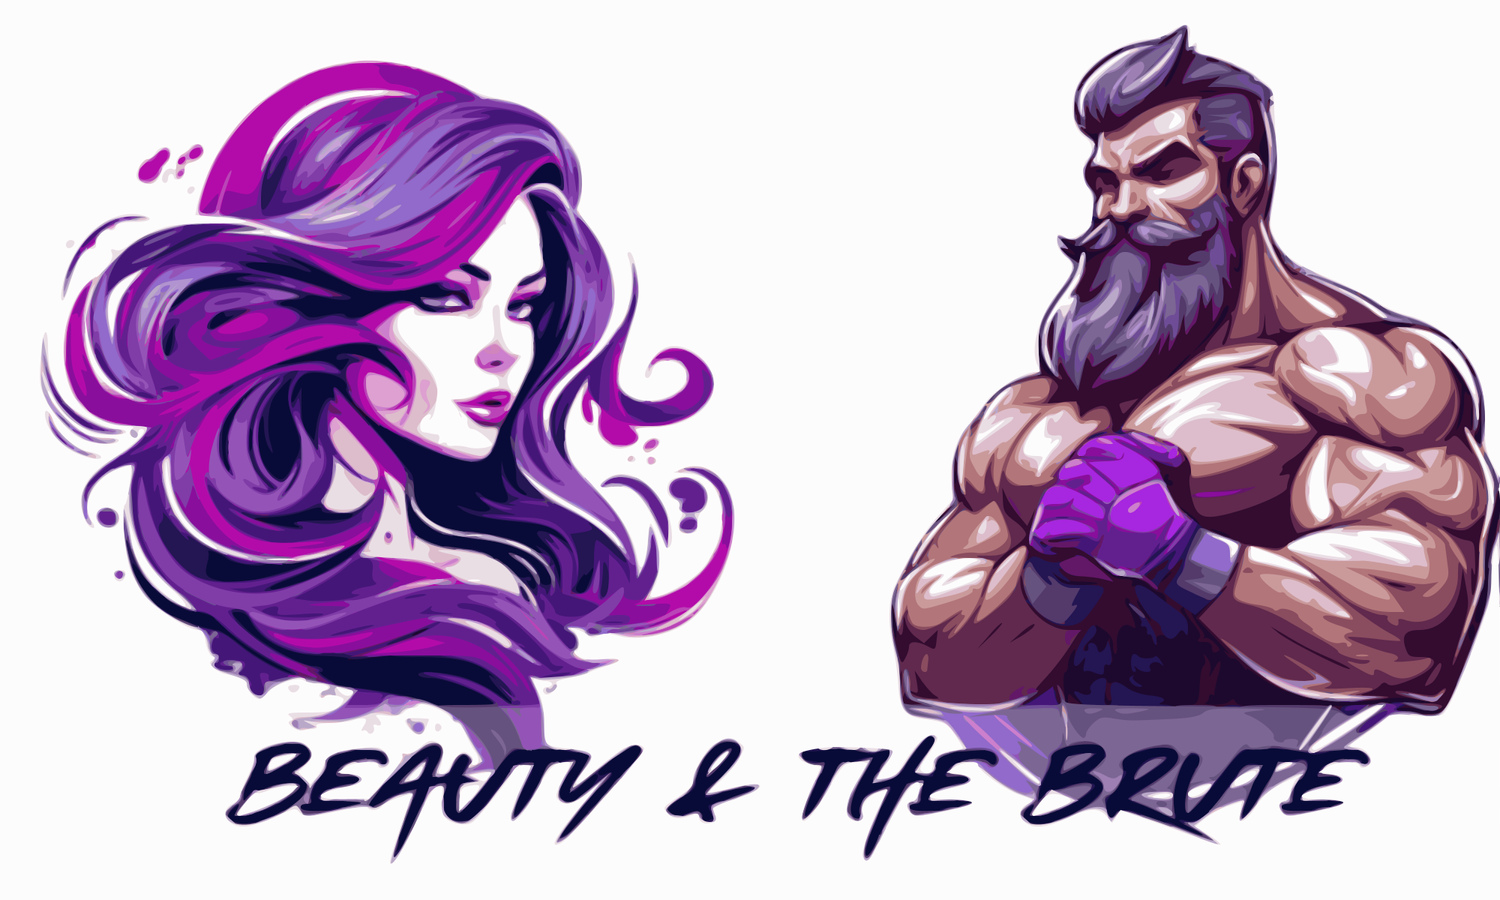 Beauty and the Brute